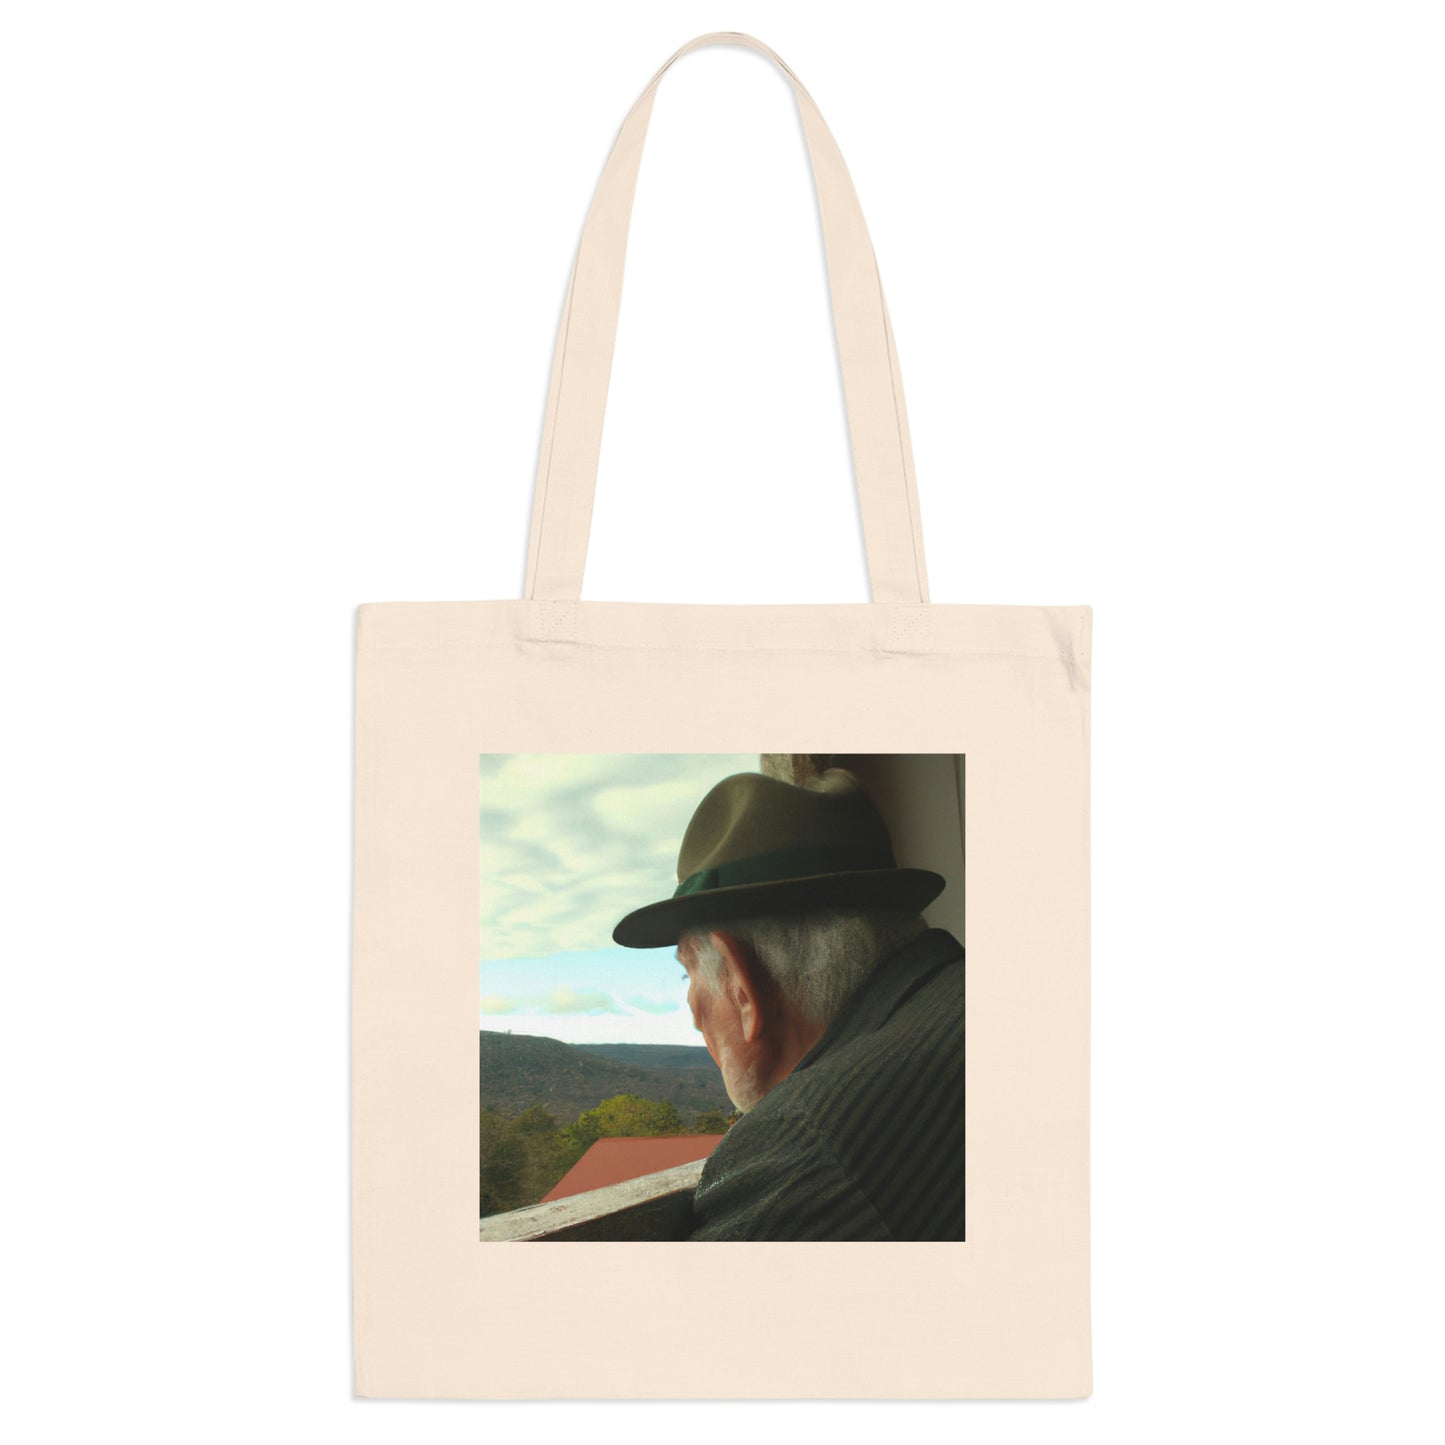 Dreams of Adventure: An Old Man's Tale - The Alien Tote Bag